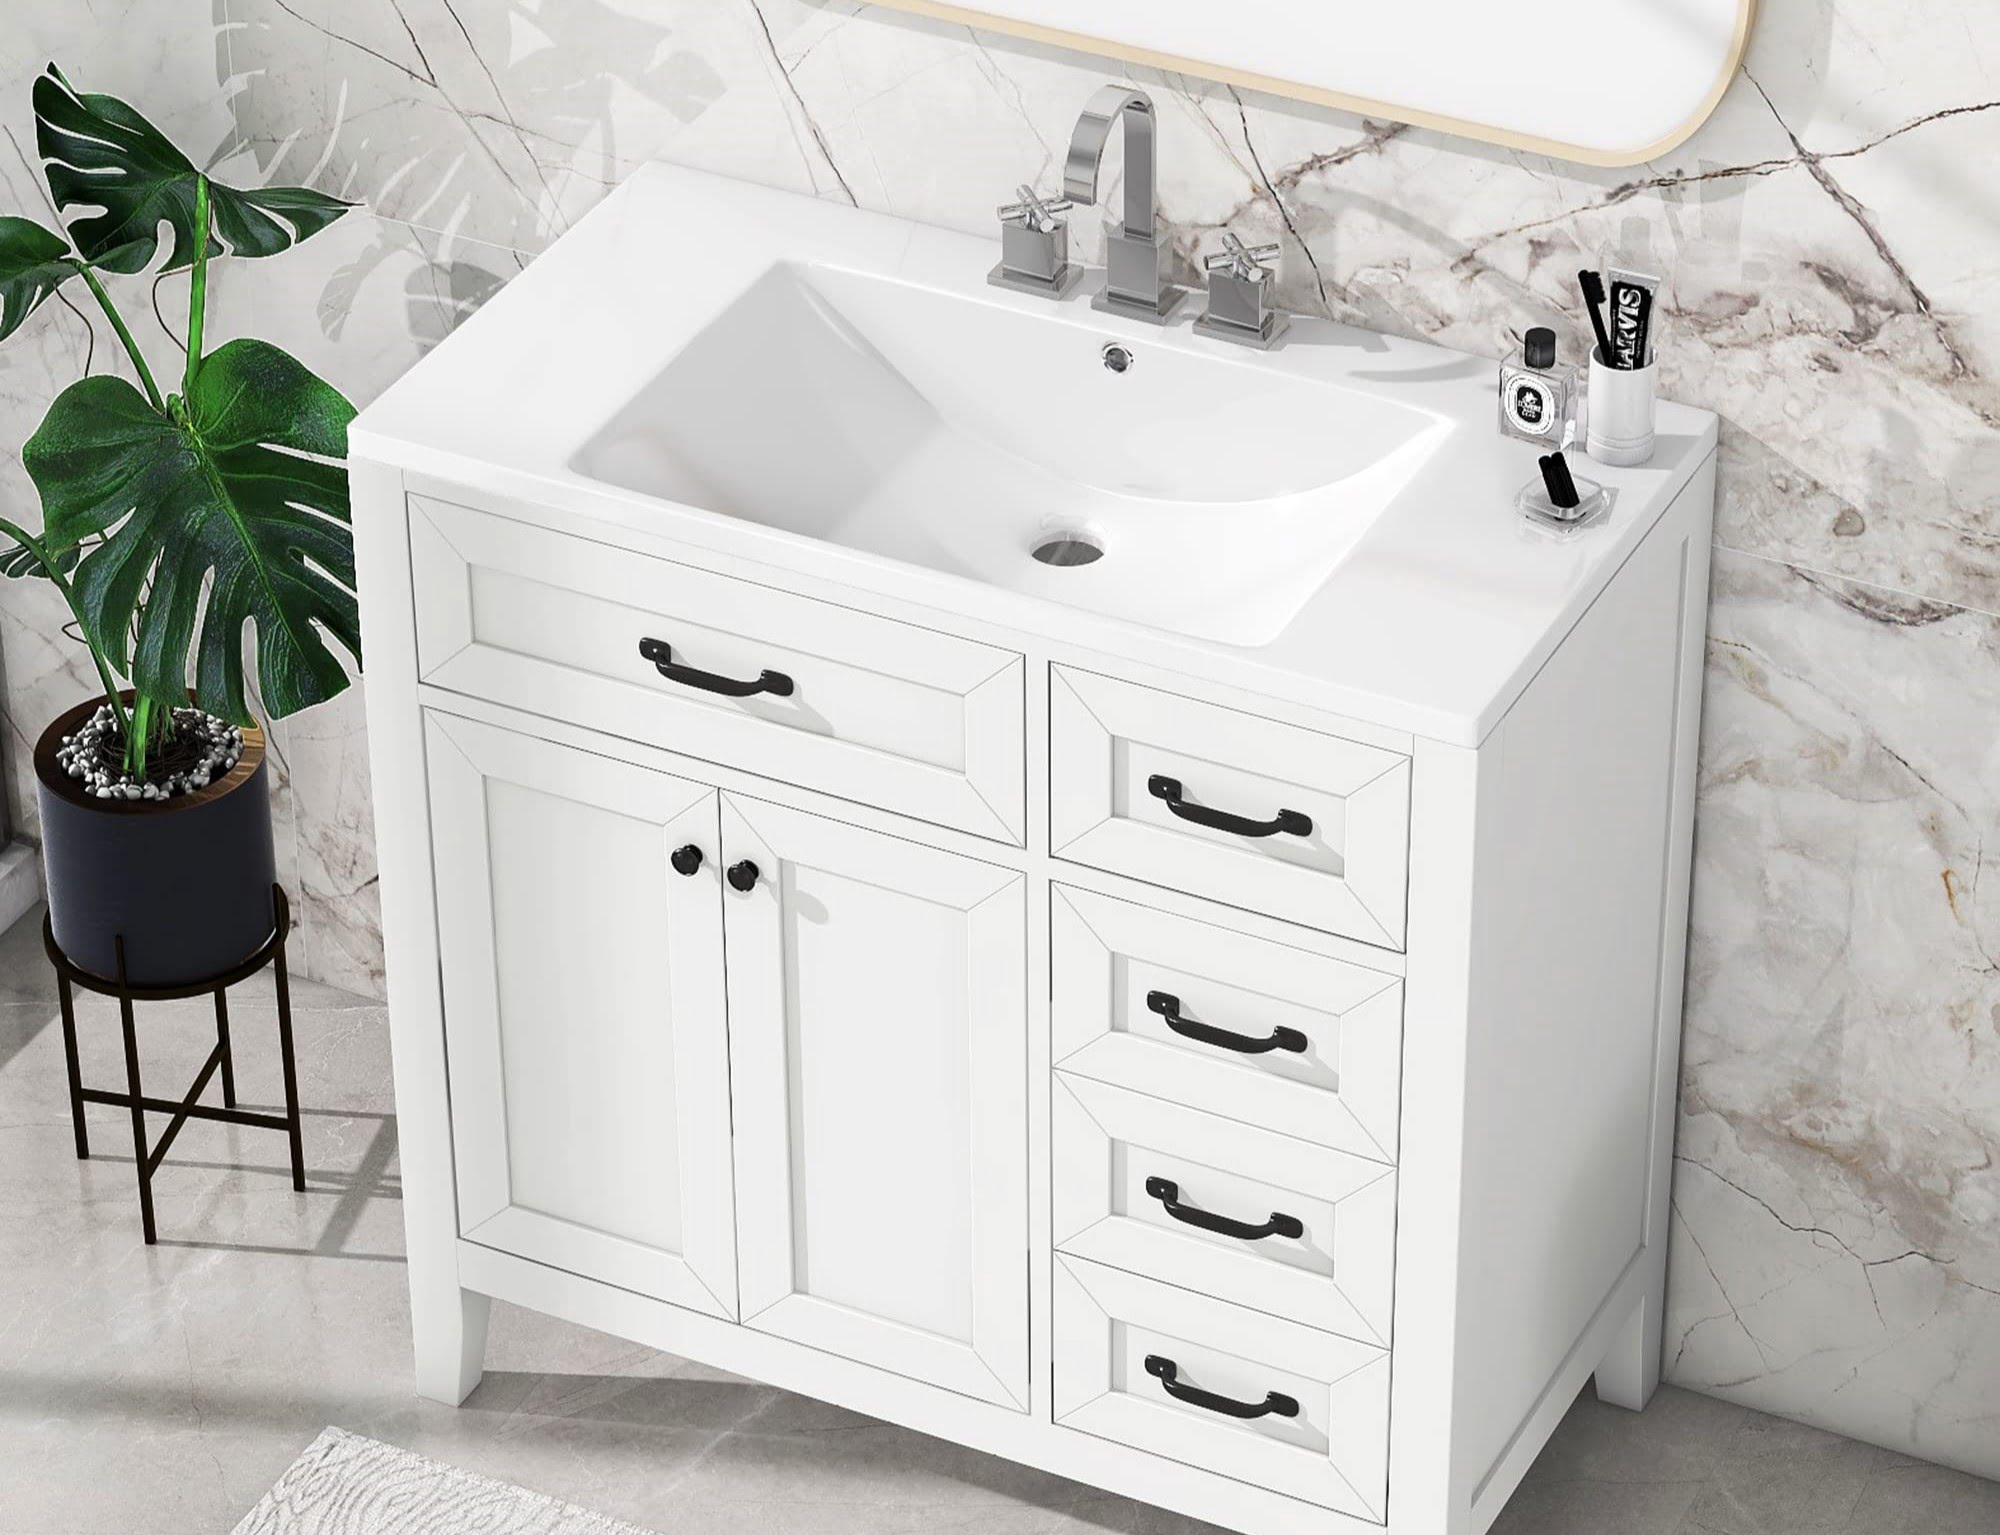 What Size Sink For 36 Inch Cabinet